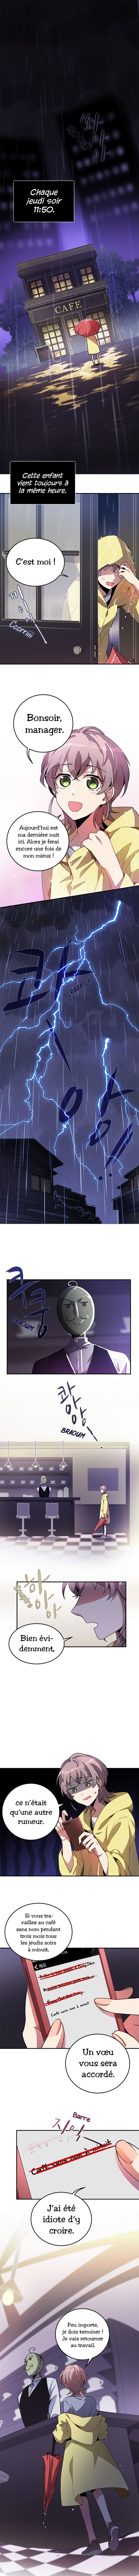 An Imperfect Kiss: Chapter 1 - Page 1